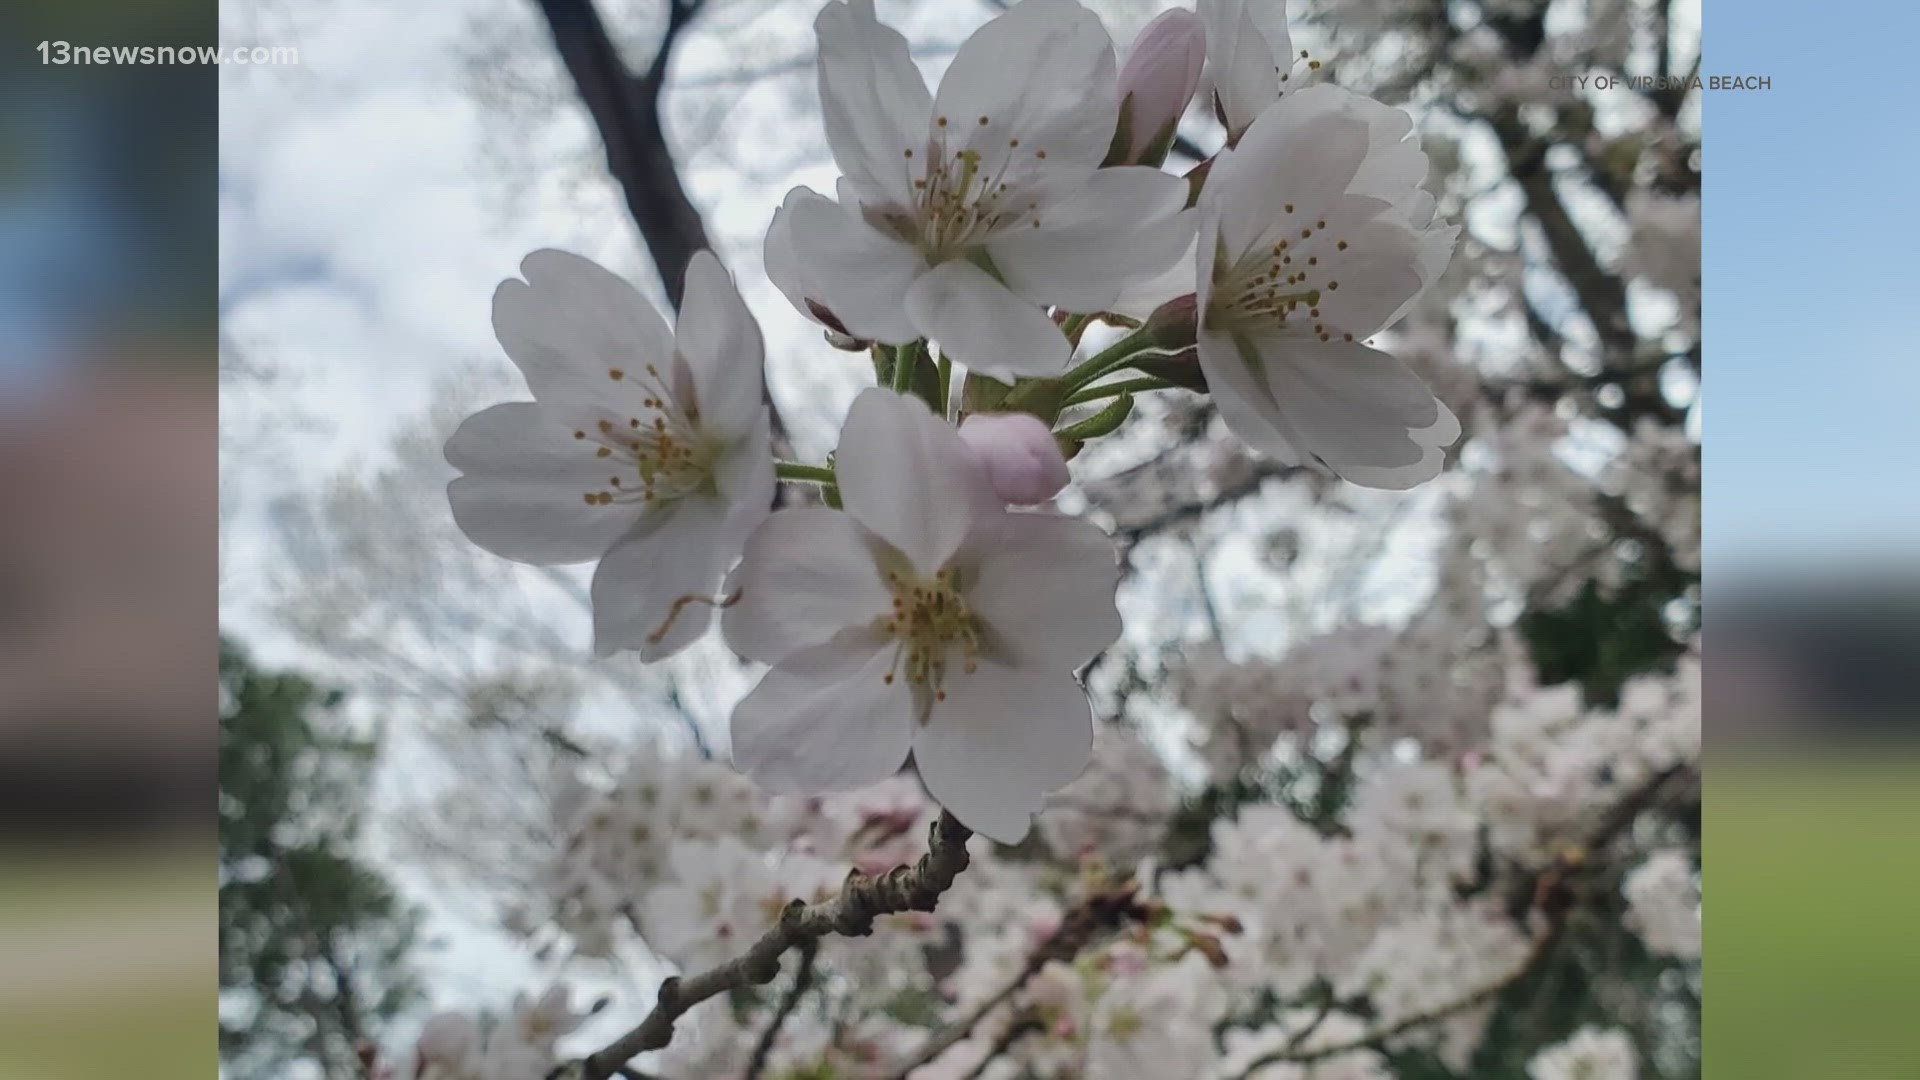 The City of Virginia Beach says the cherry blossoms at Red Wing Park are approaching peak bloom — just in time for the park's Cherry Blossom Festival.